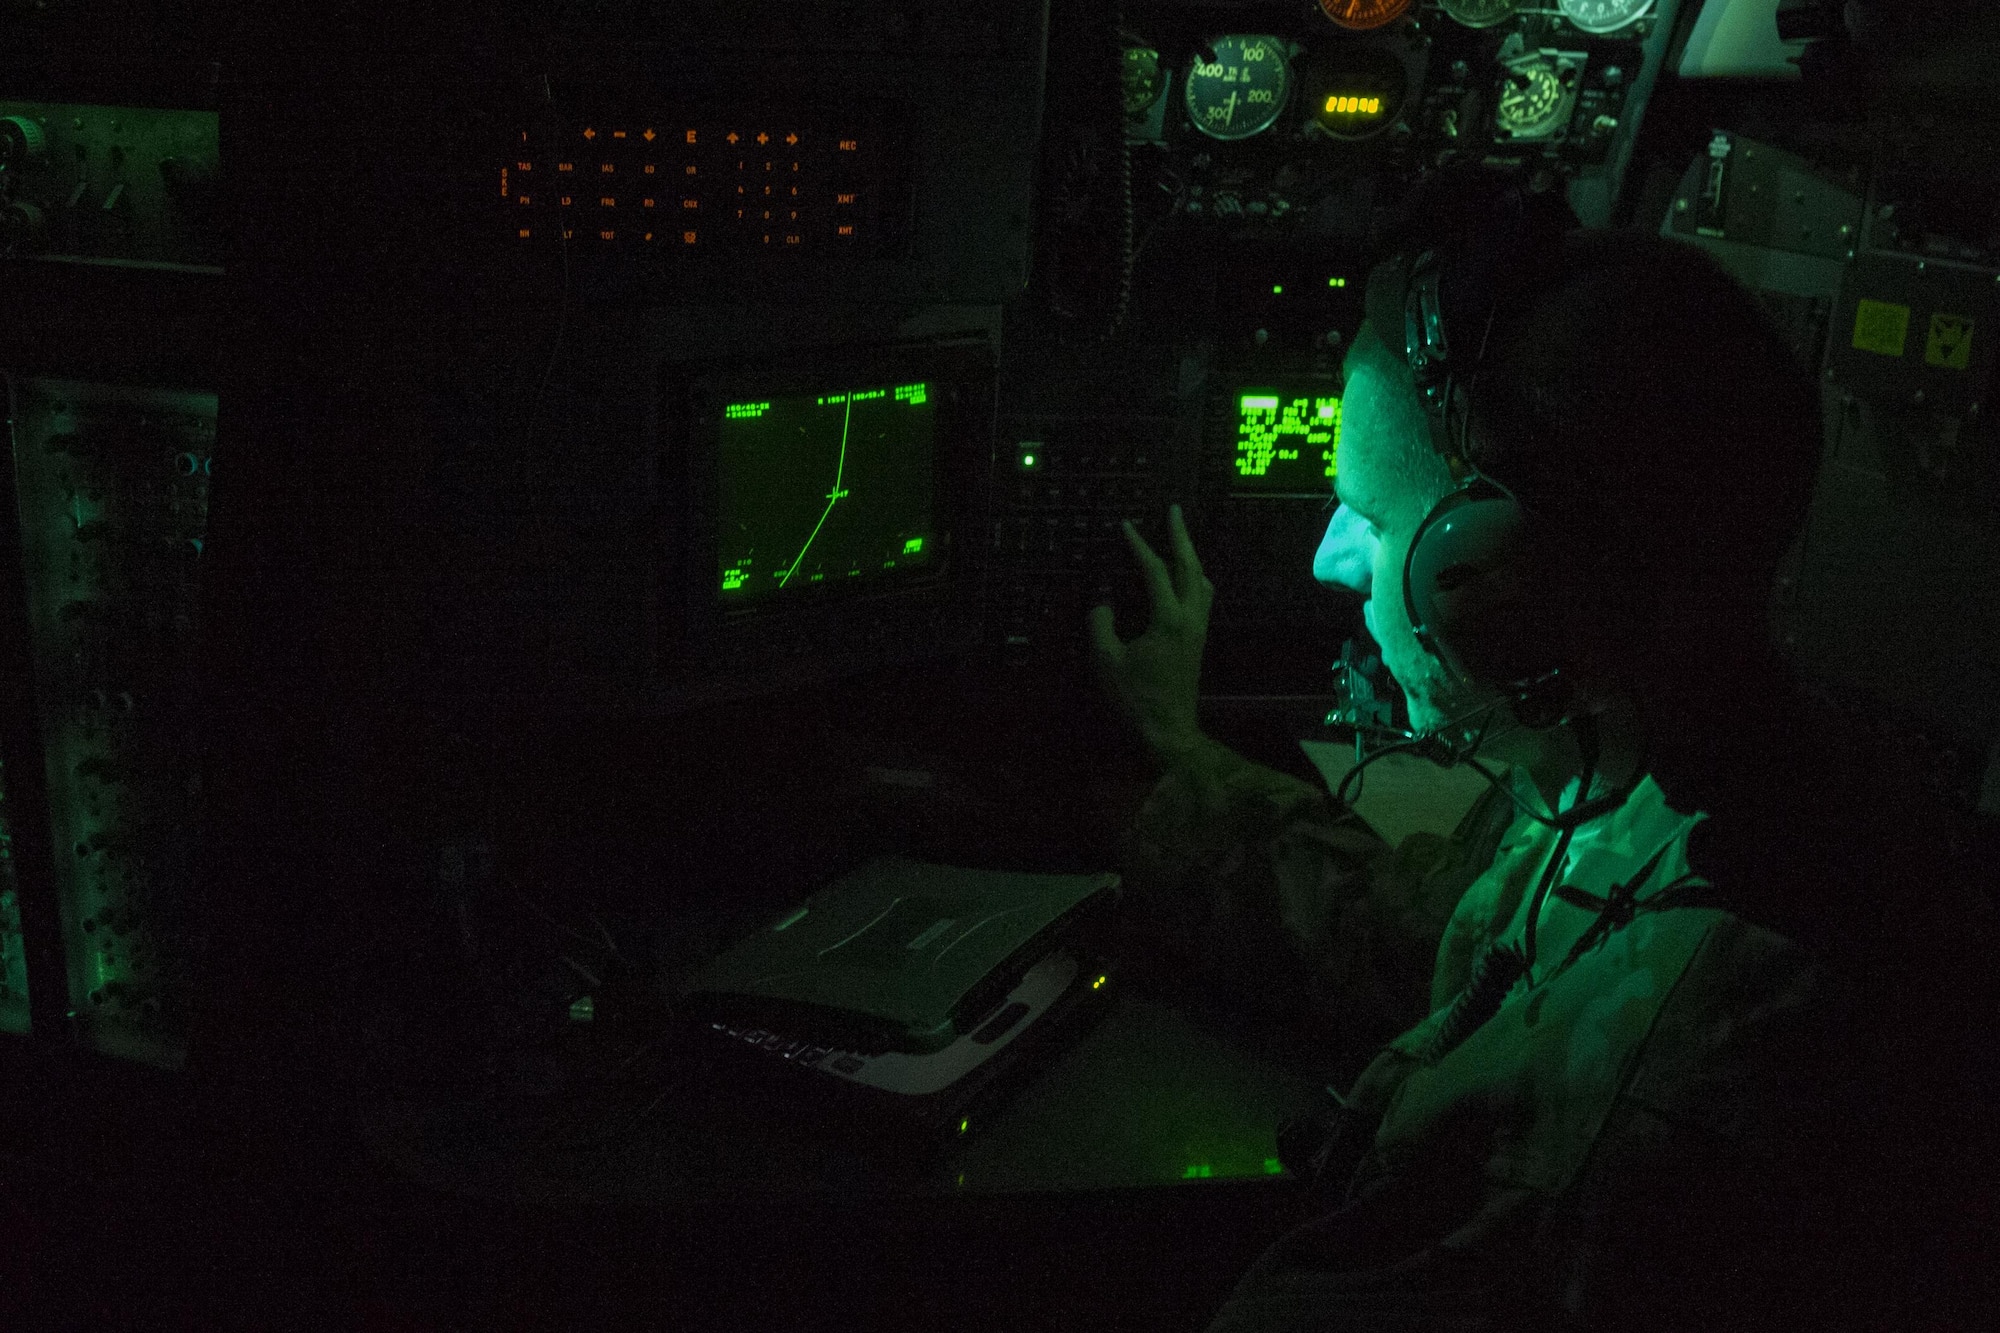 1st Lt. James Gillie, 746th Expeditionary Airlift Squadron flight navigator, deployed at Al Udeid Air Base, Qatar, monitors his equipment aboard a C-130 Hercules during an Aeromedical Evacuation flight from Bagram Airfield, Afghanistan to Al Udeid. The flight was in support of the 455th Expeditionary Evacuation Squadron, out of Bagram, who are tasked with moving injured and sick patients to locations with higher levels of medical care. (U.S. Air Force photo by Tech. Sgt. Robert Cloys/RELEASED)